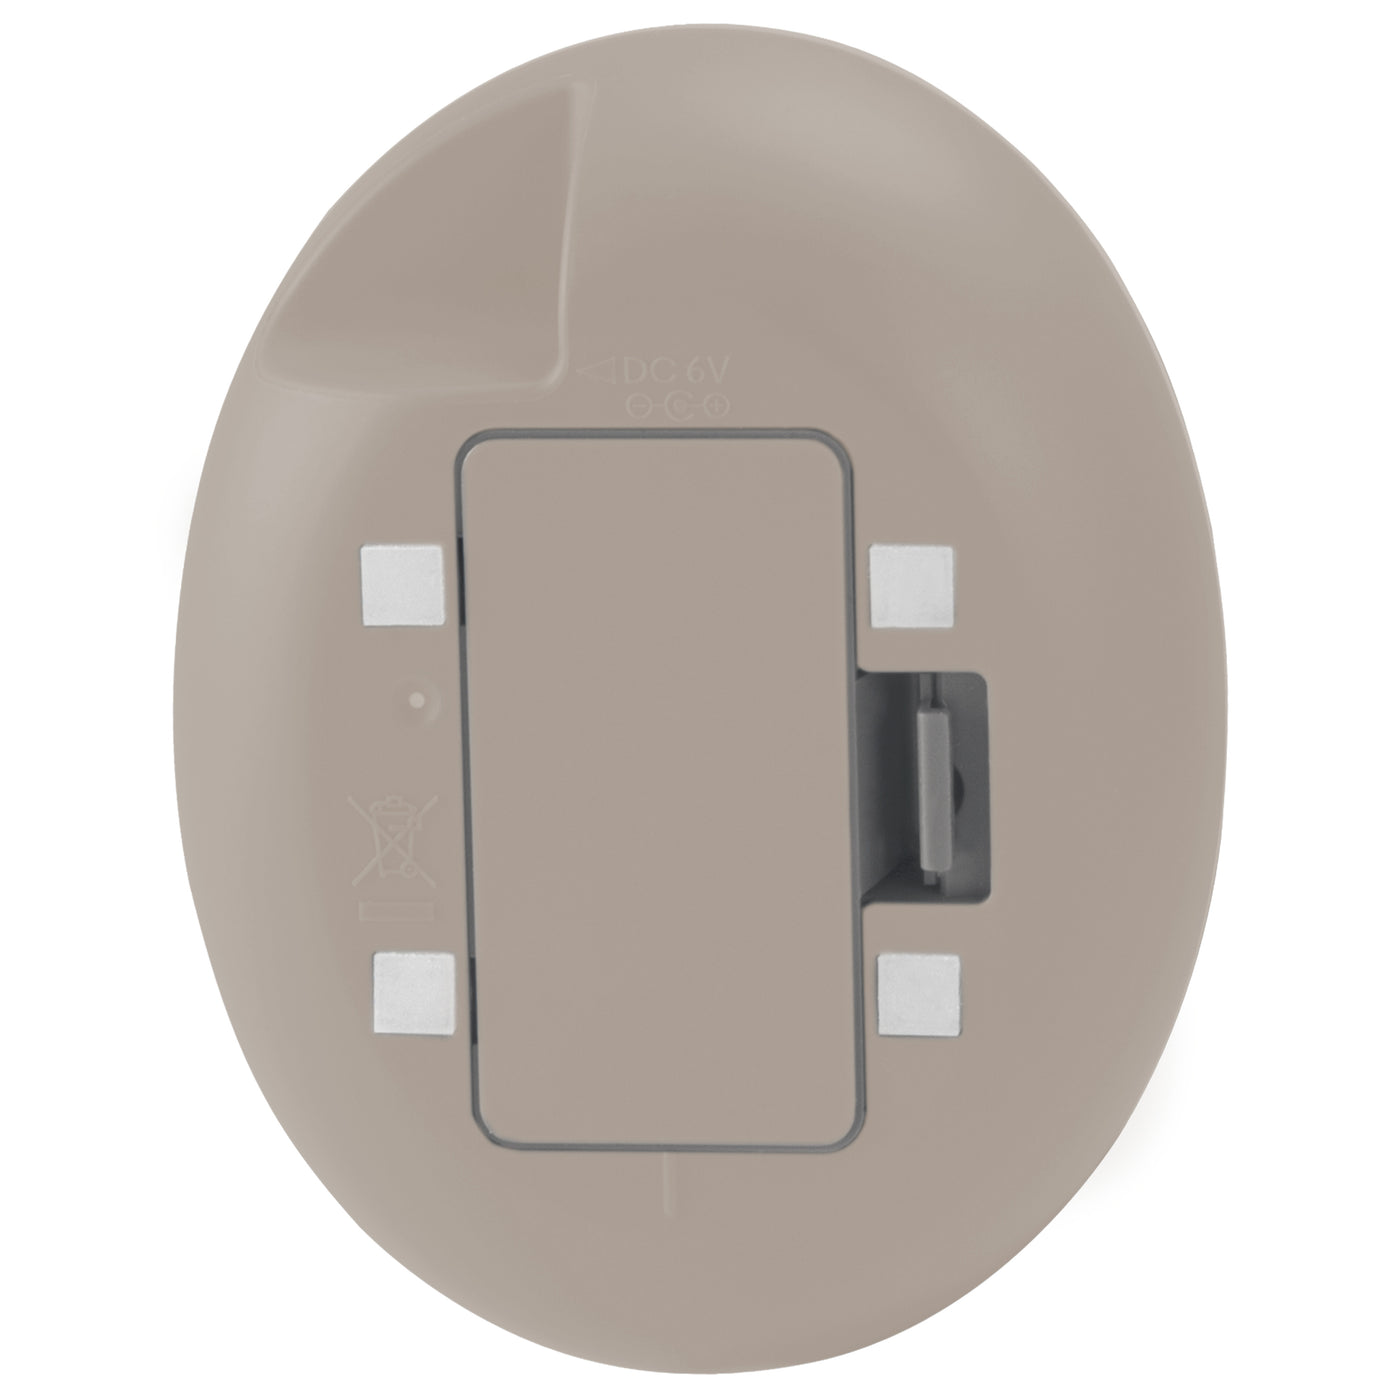 Alecto DBX110BE - Babyfoon Full Eco DECT, wit/taupe